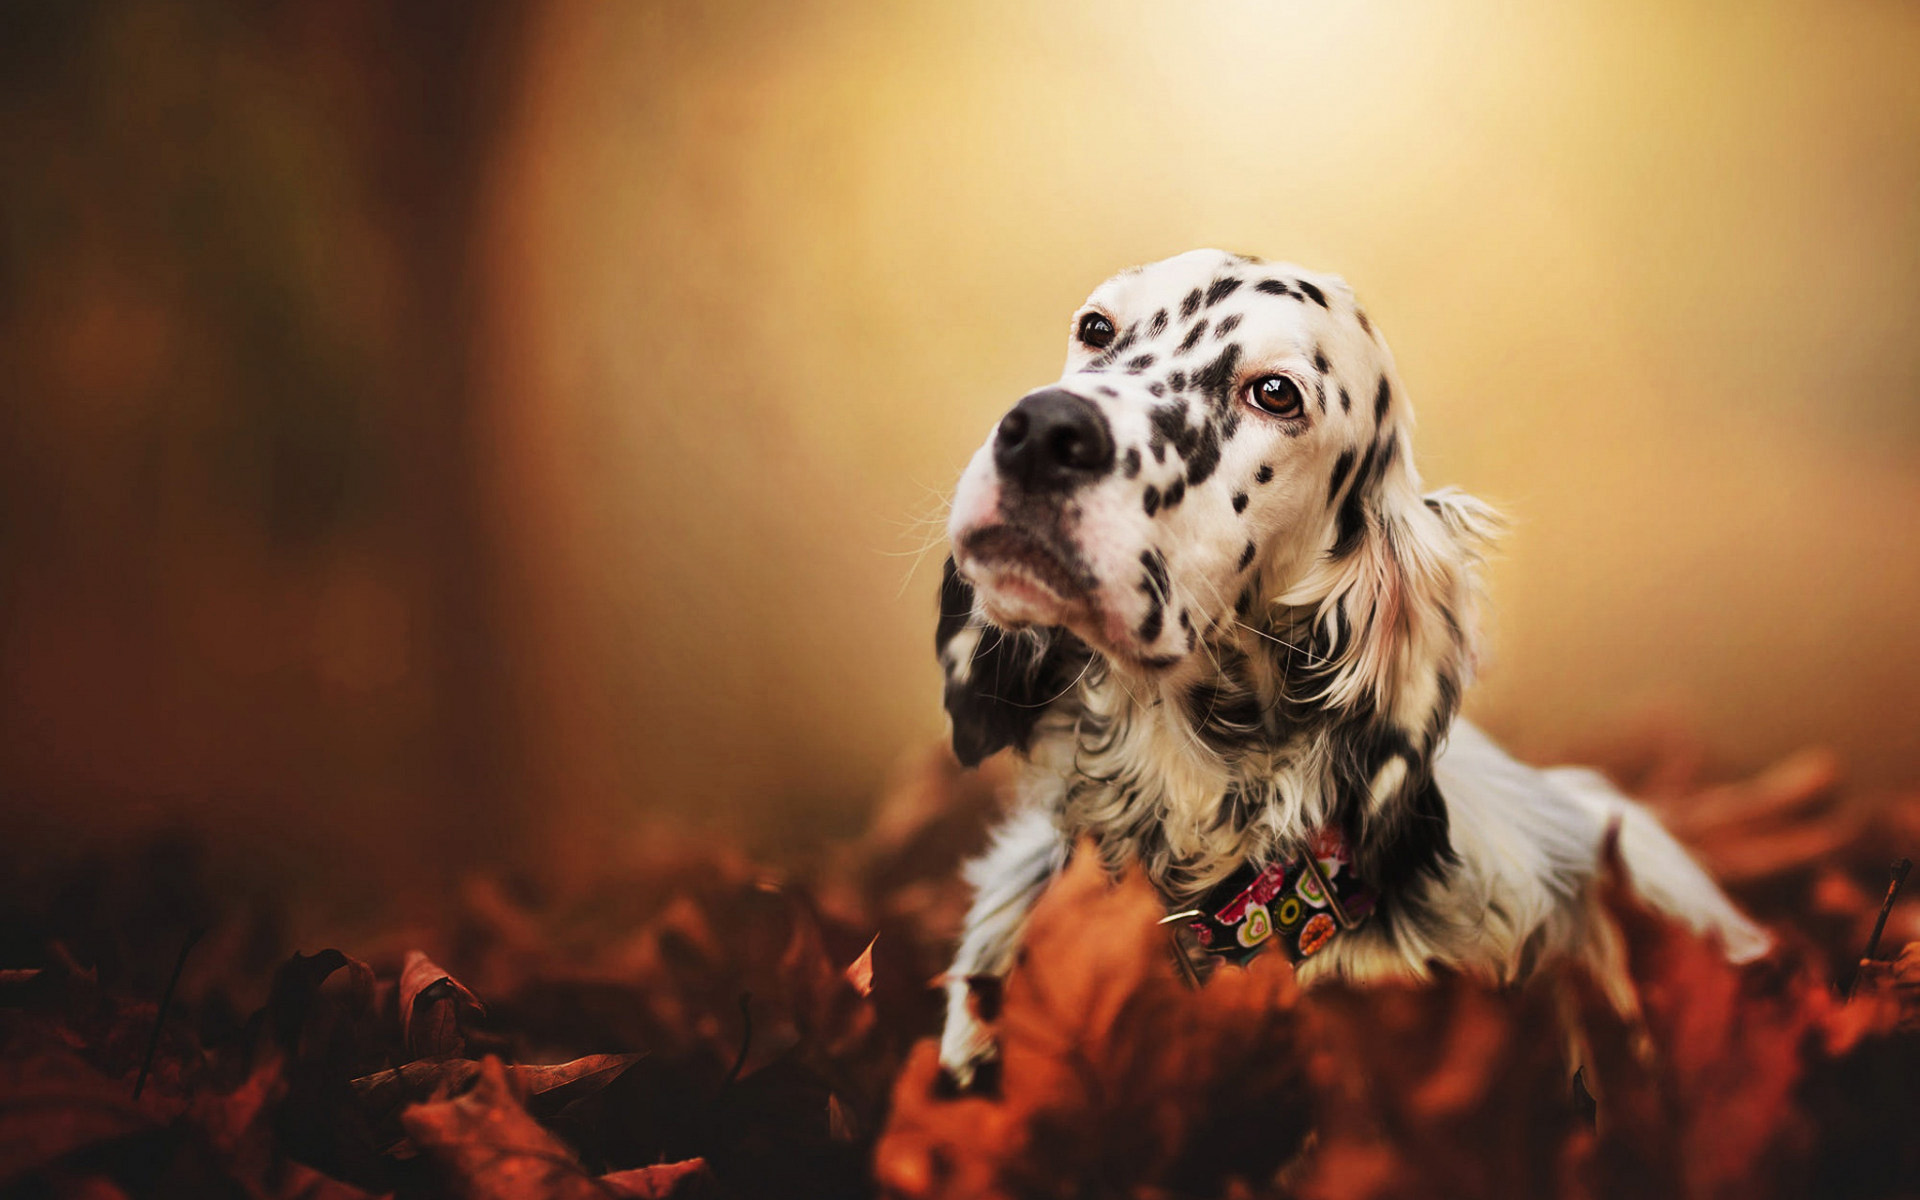 Download Wallpaper English Setter, Autumn, Pets, Puppy, Close Up, Cute Animals, Dogs, English Setter Dog, Dalmatian Setter For Desktop With Resolution 1920x1200. High Quality HD Picture Wallpaper